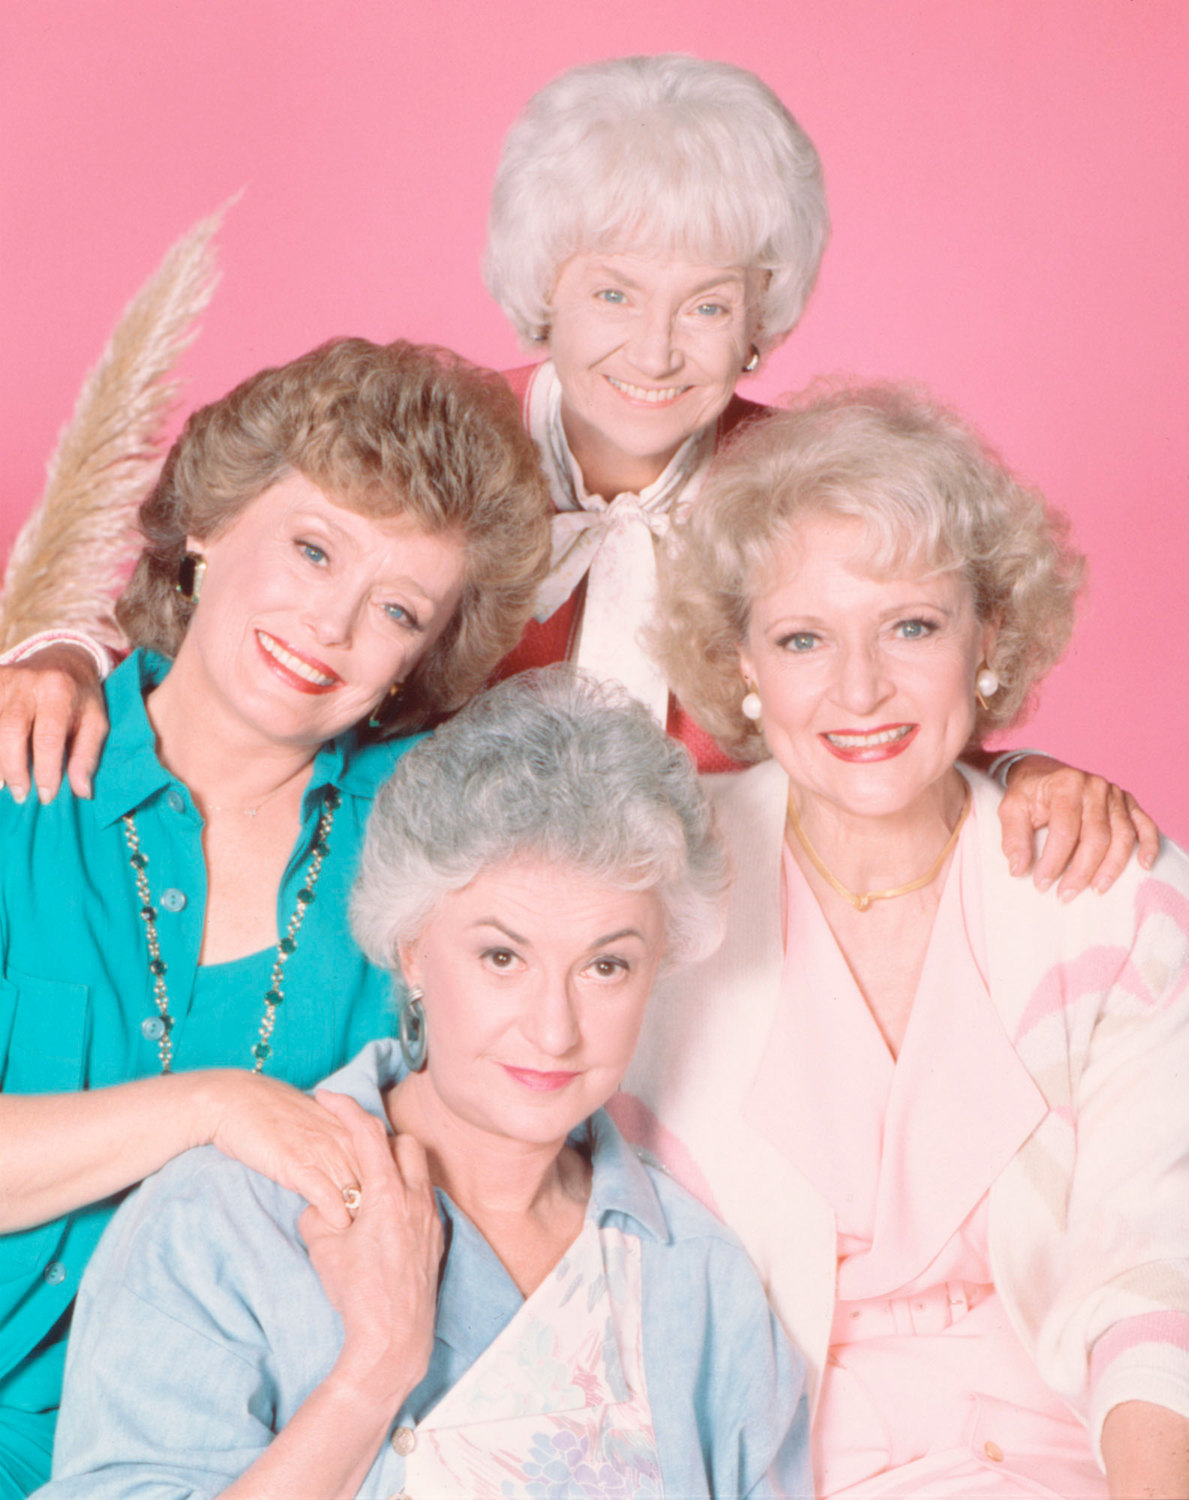 Bea Arthur Image The Golden Girls HD Wallpaper And Background